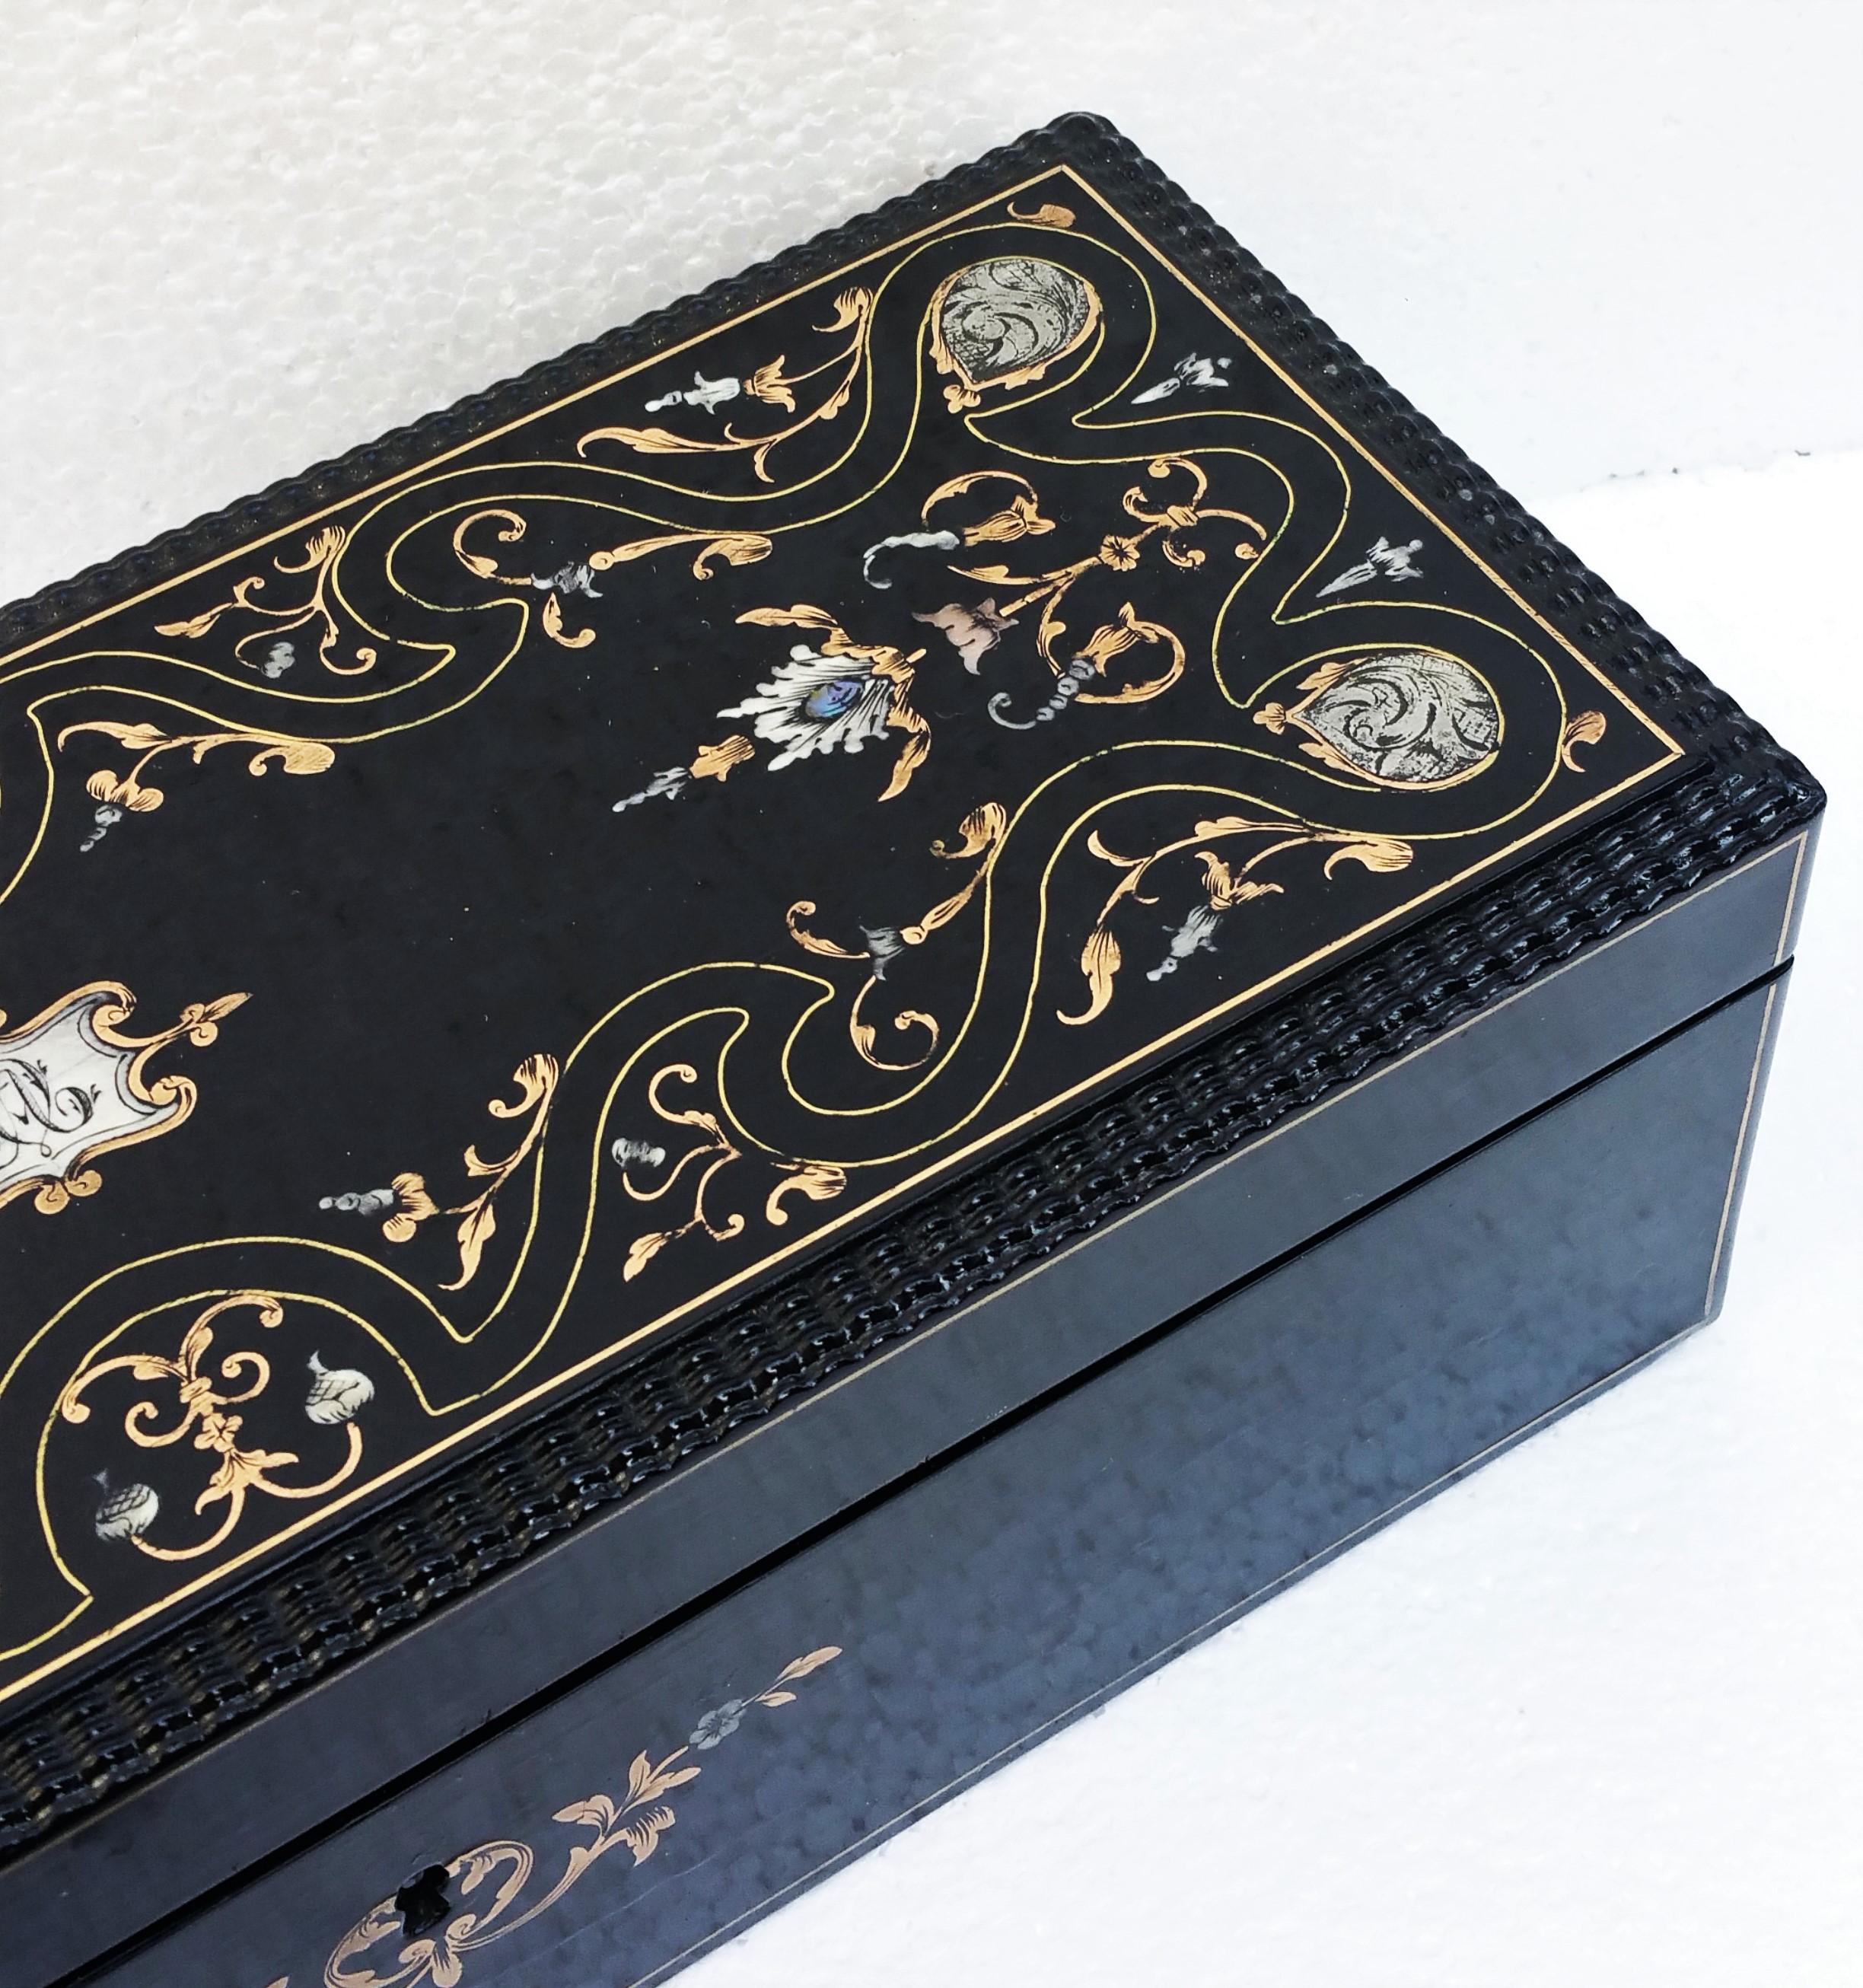 Beautiful Napoleon III set of two decorative boxes, France 19th Century.
The biggest one is a glove or jewelry box in ebony veneer and inlay in brass, pewter mother of pearl and bone.
Boulle style marquetry.
The inside part is in mahogany. Opens